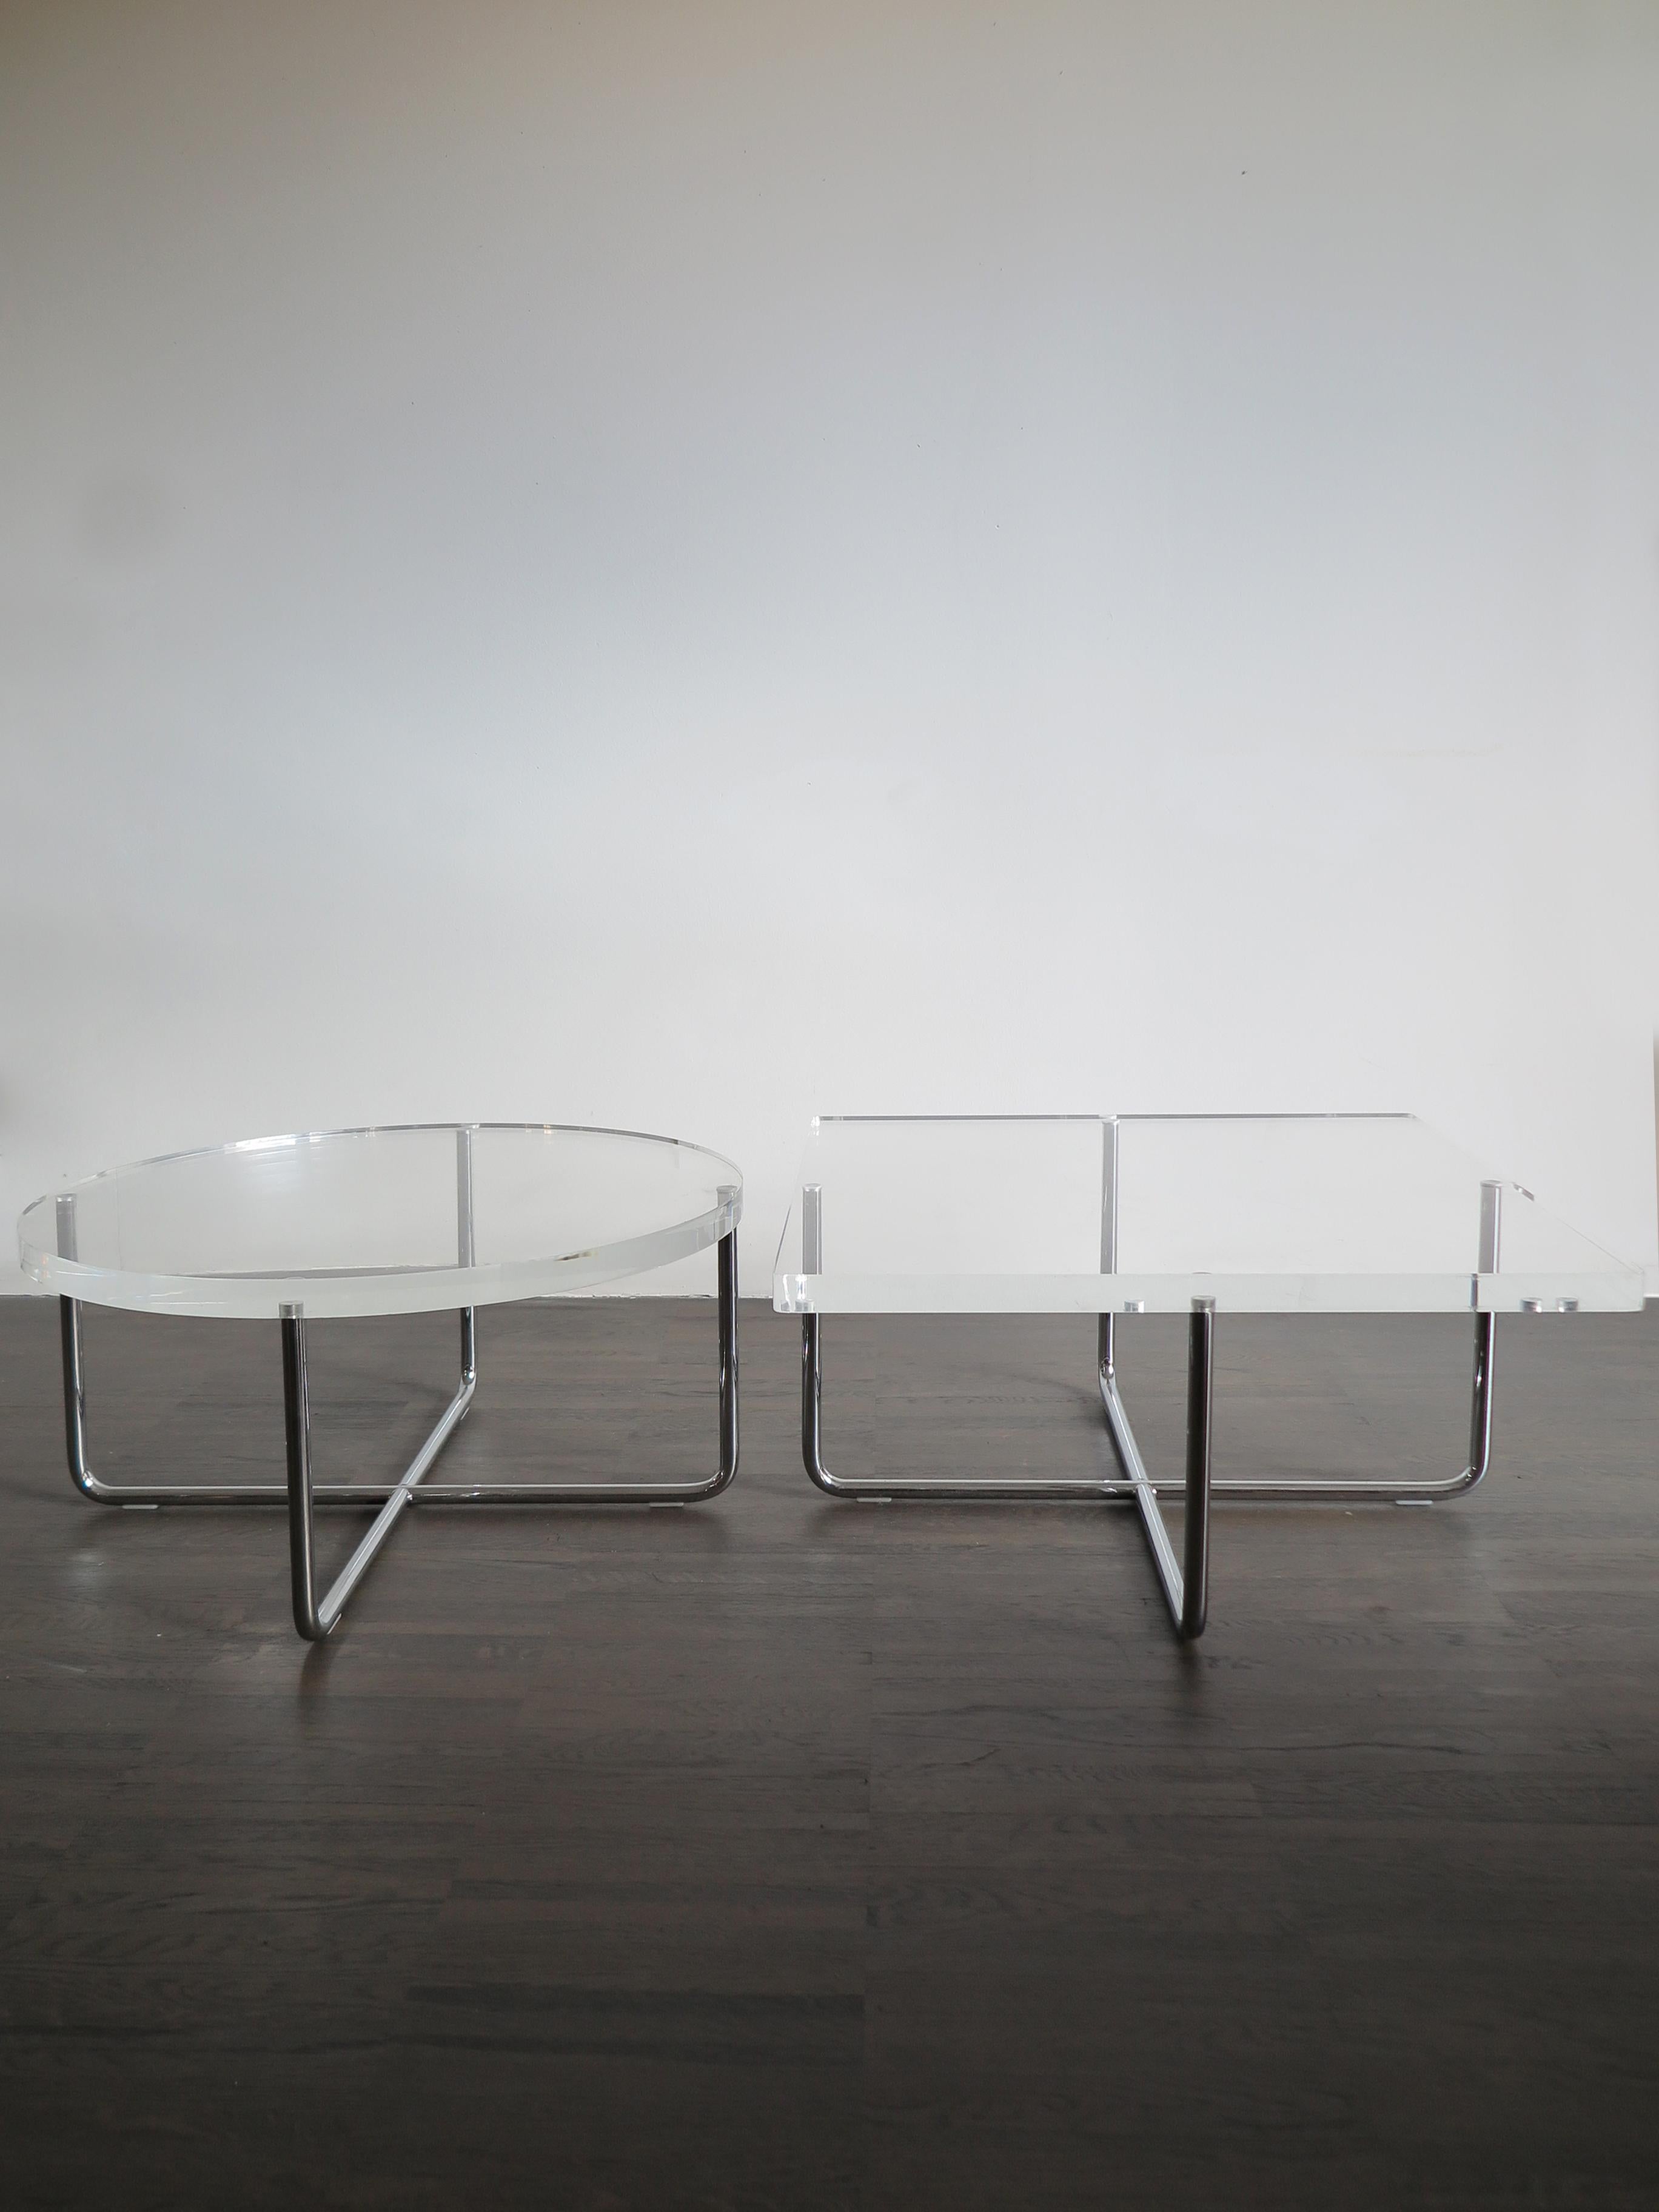 Set of Two Italian square and circle modern coffee tables or sofa tables manufactured by Minotti, with plexiglass top and frame in chromed metal with glossy chrome finish, circa 1990s.

Round measures: Diameter 63 cm - height 32 cm
Square